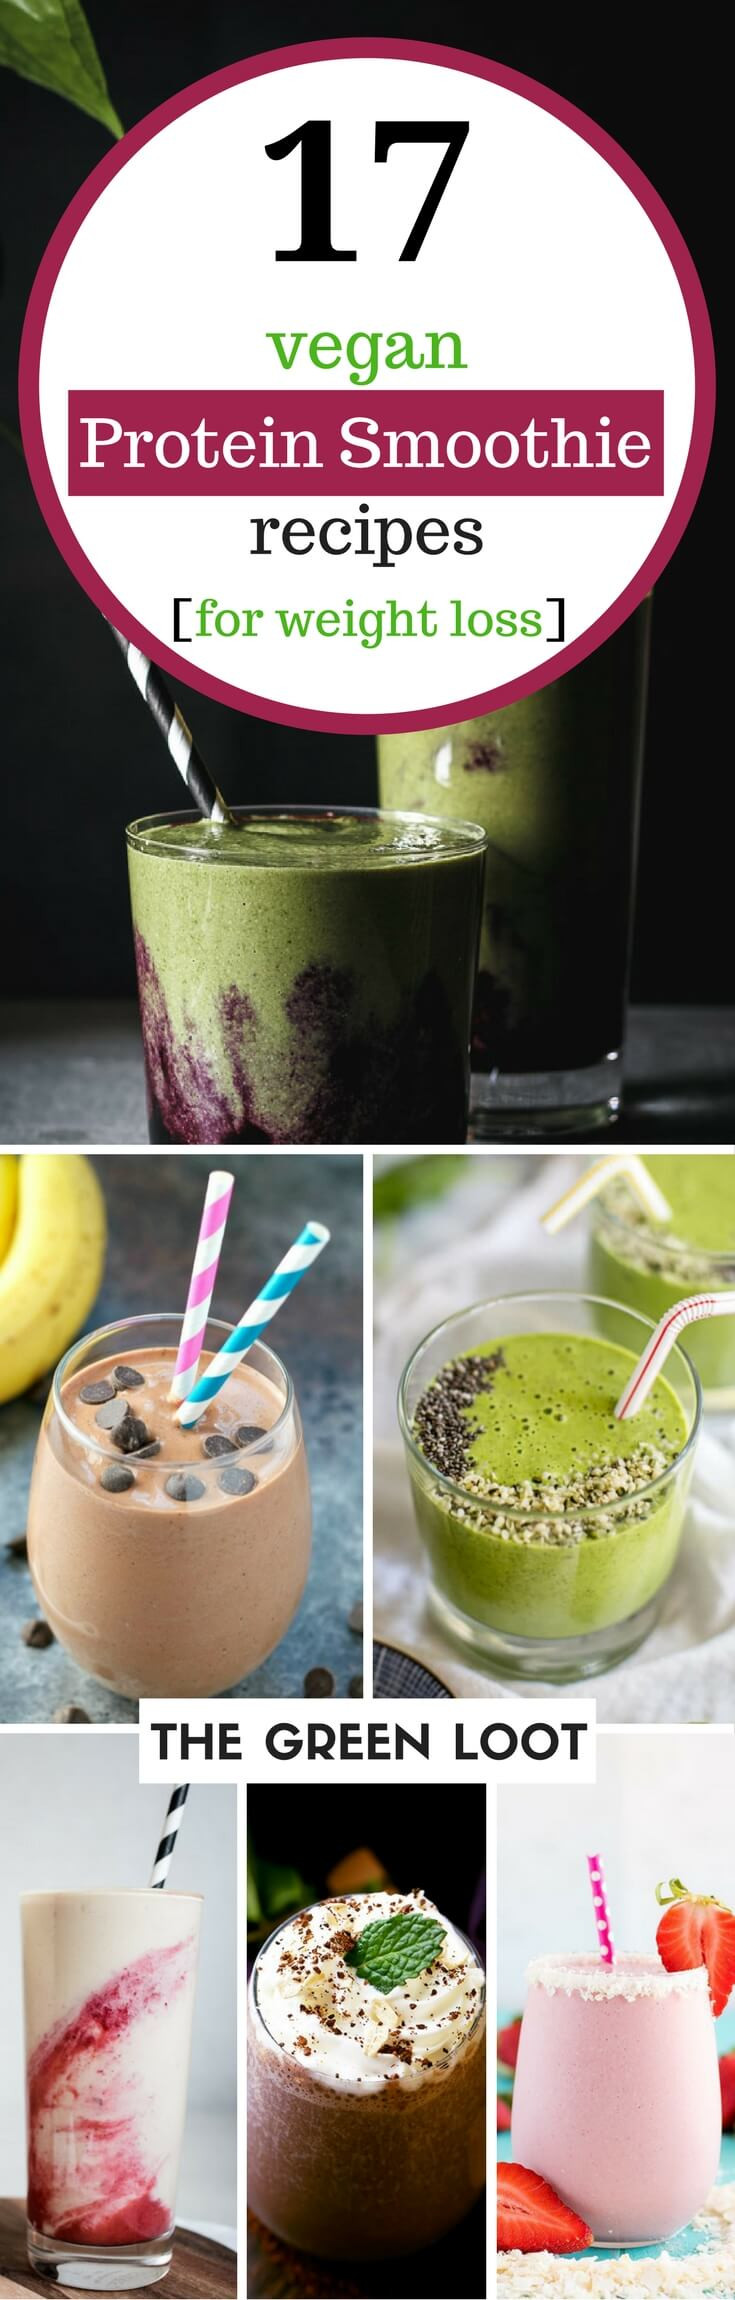 Protein Smoothies Weight Loss
 17 Tasty Vegan Protein Smoothie Recipes for Weight Loss